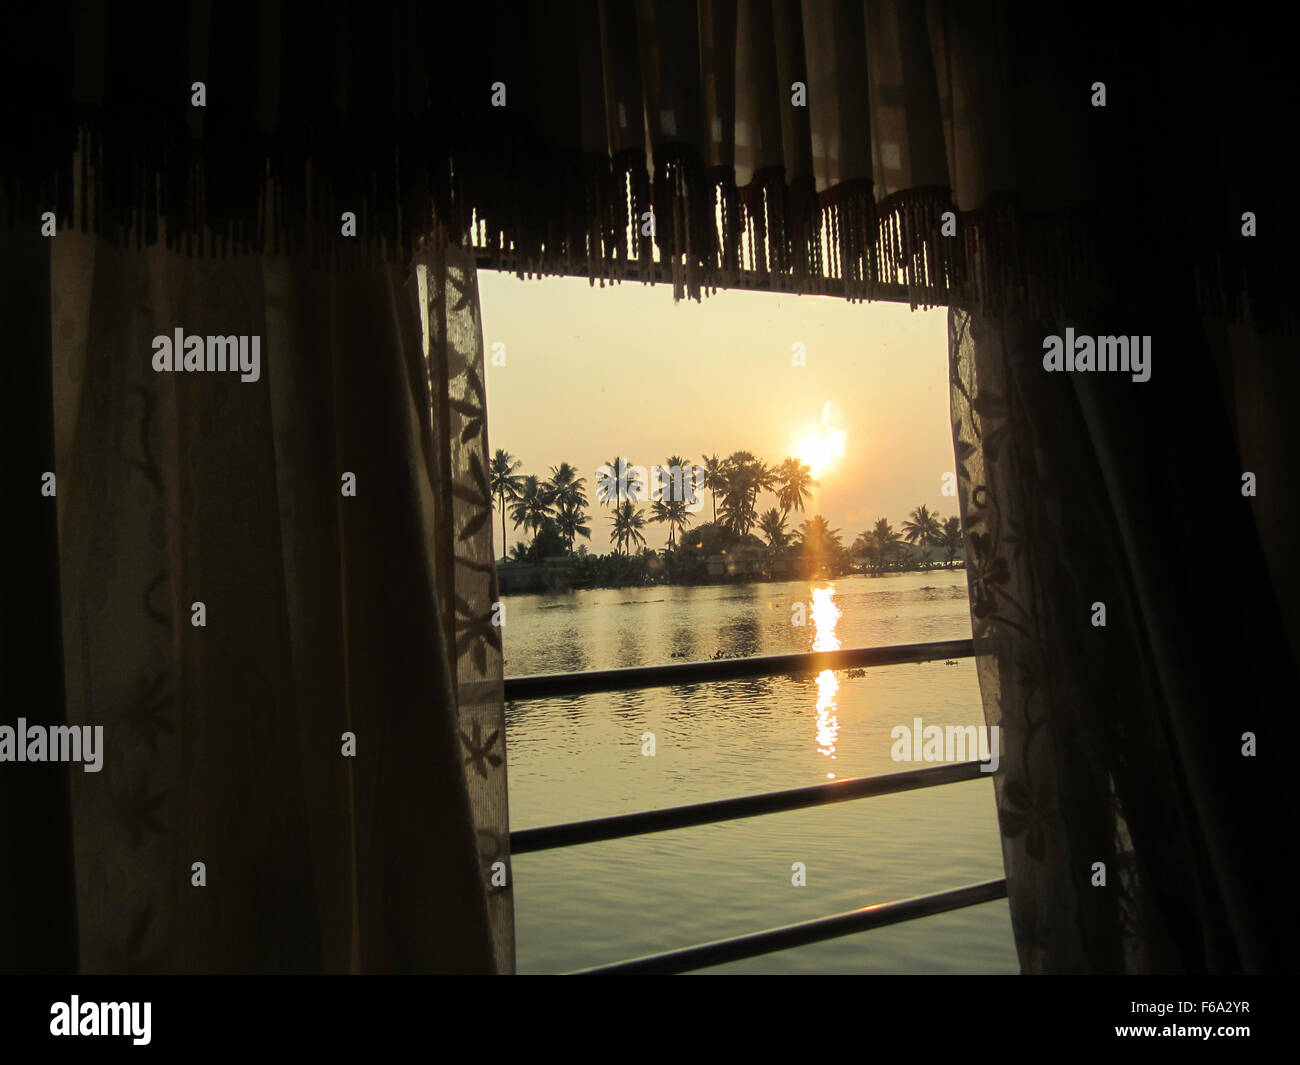 Houseboat window - sunset view showing the  calm waterway  and small cluster of palm trees framed by curtain detail Stock Photo